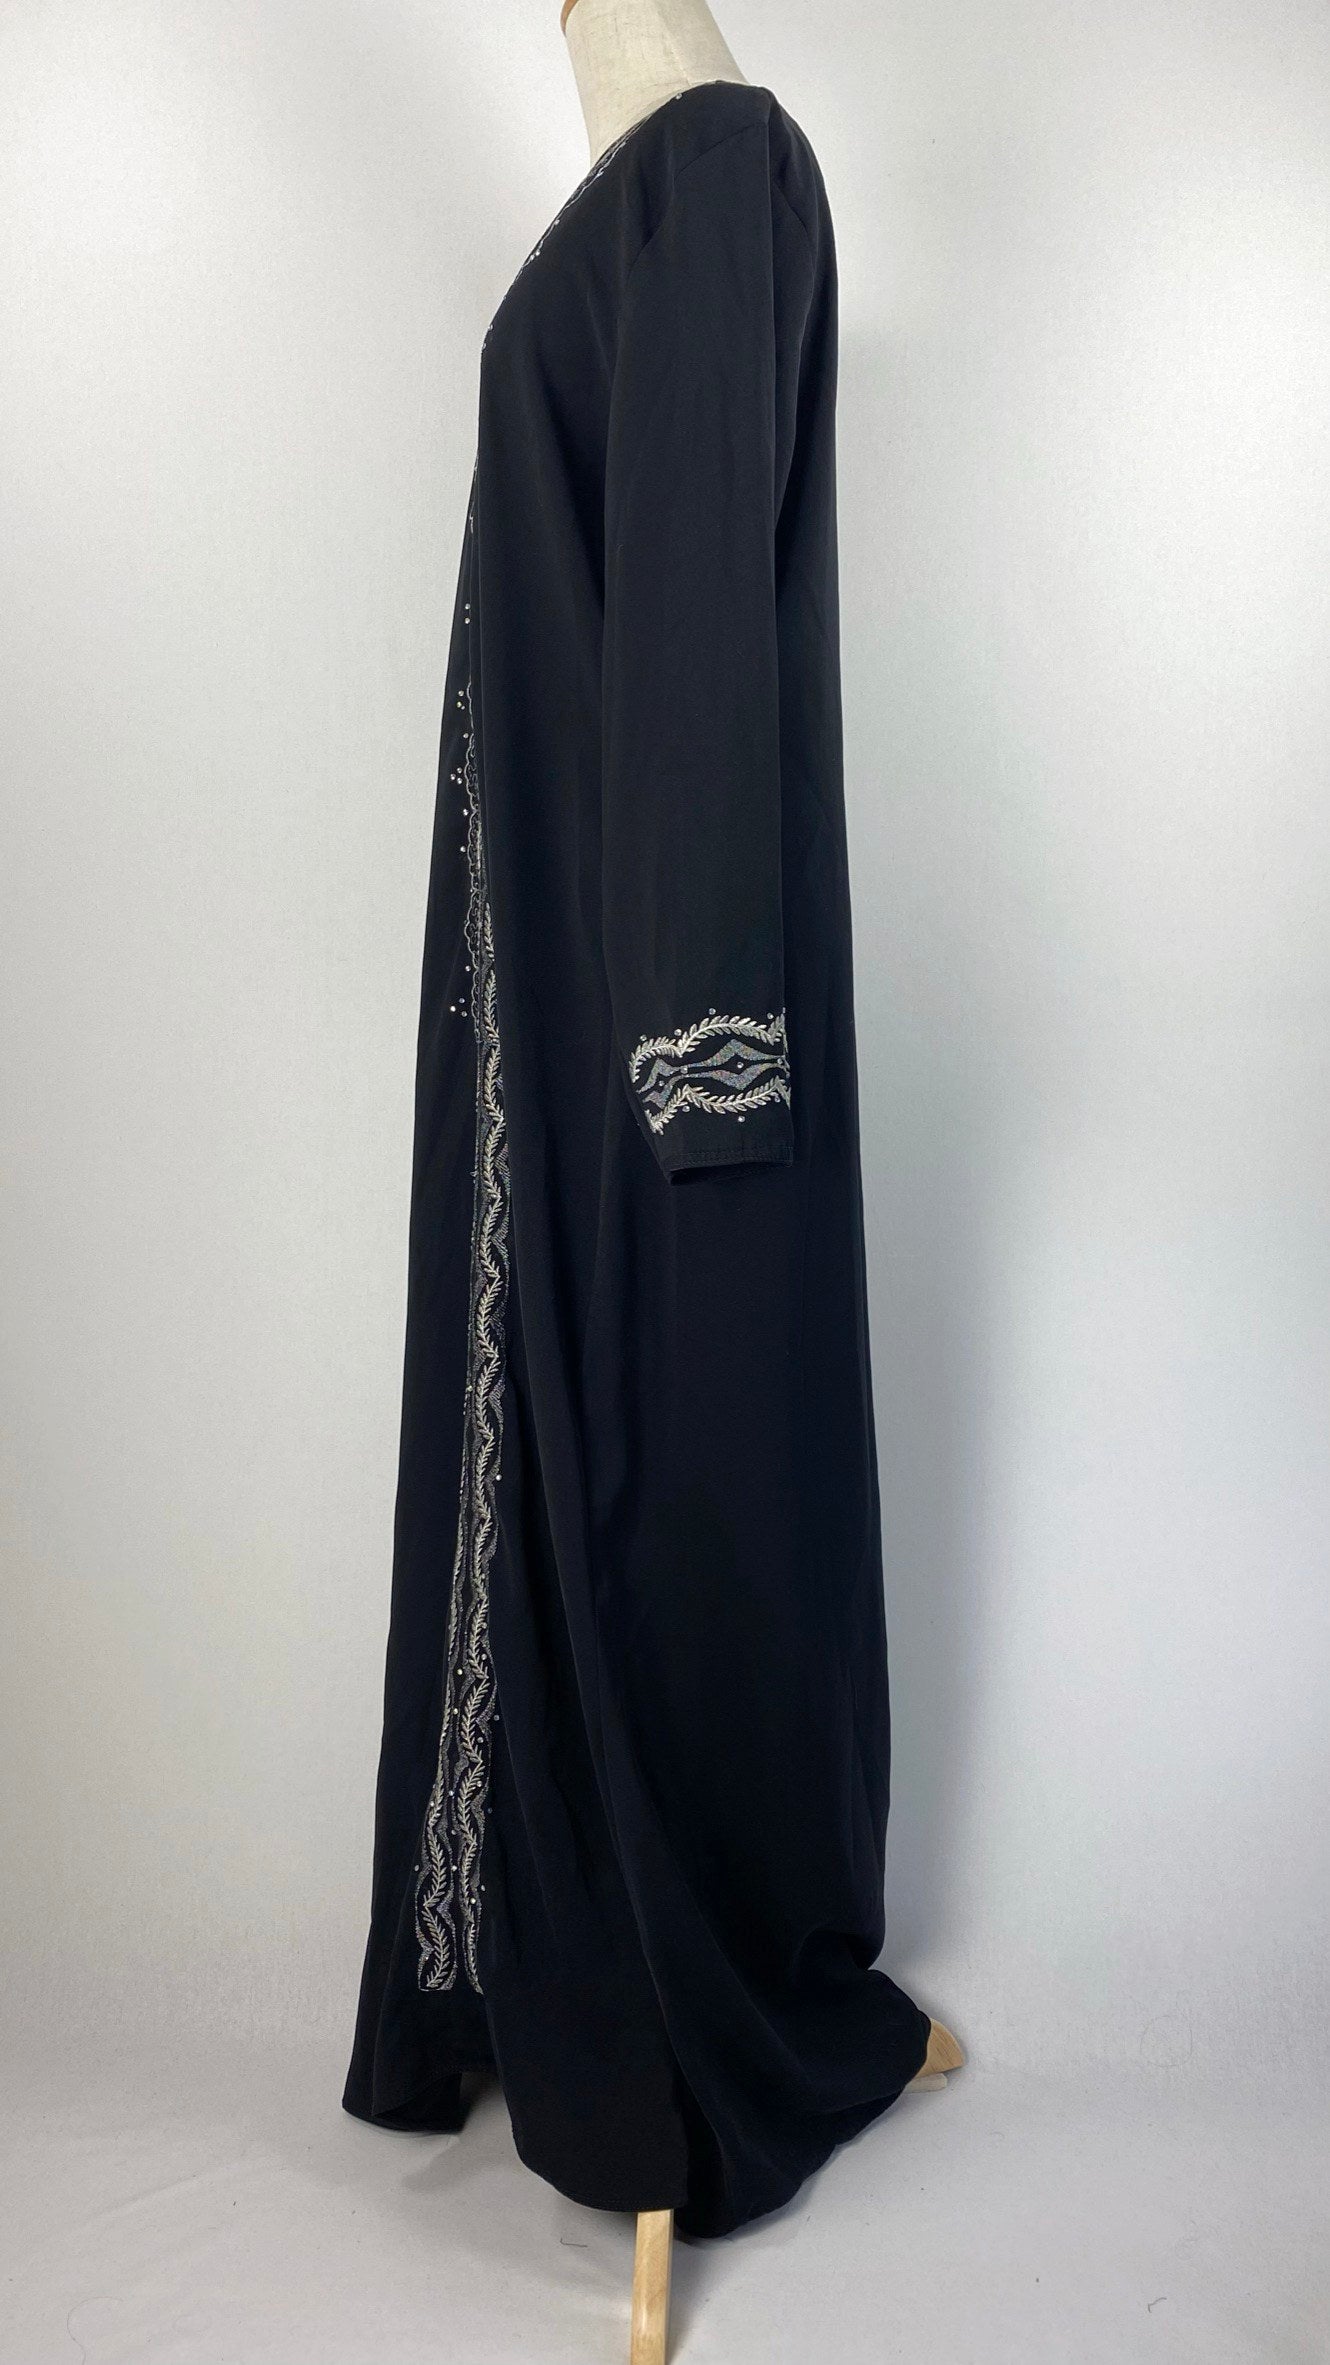 Long Sleeve Closed Abaya with Embroidery and Light Beading, Black